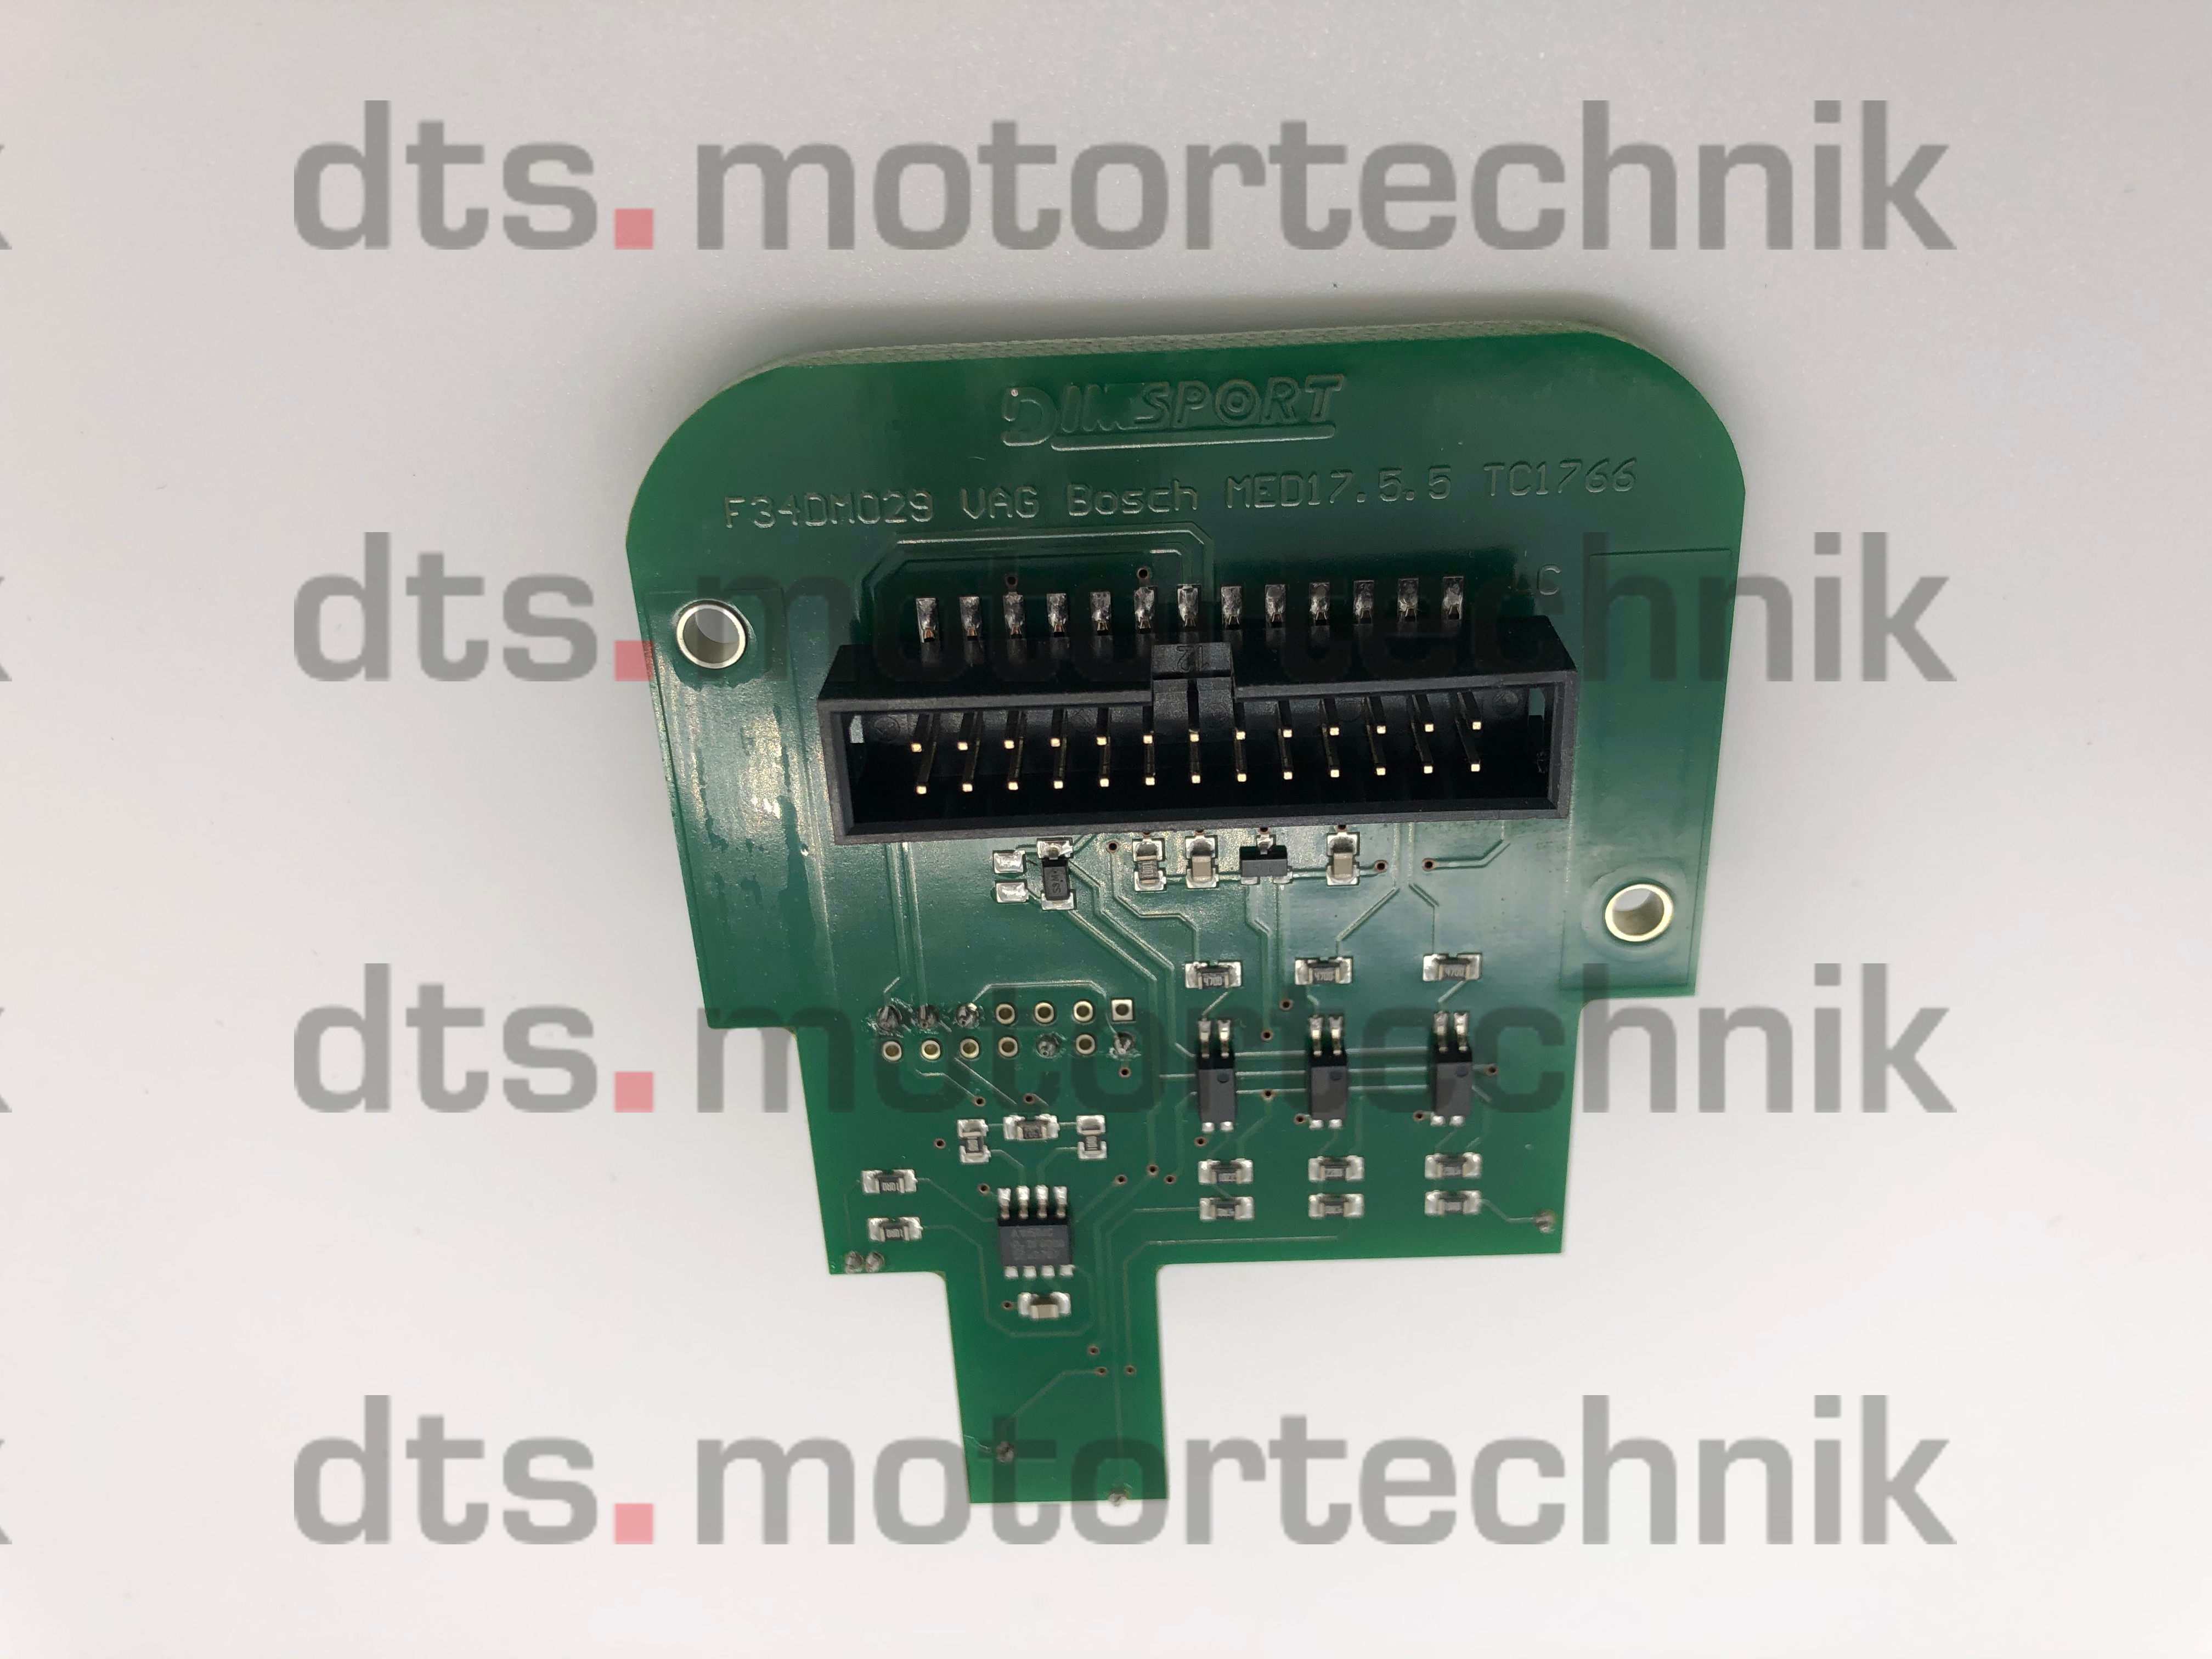 Bosch MED17.5.5 (VAG Group) - Infineon Tricore CPU Terminaladapter